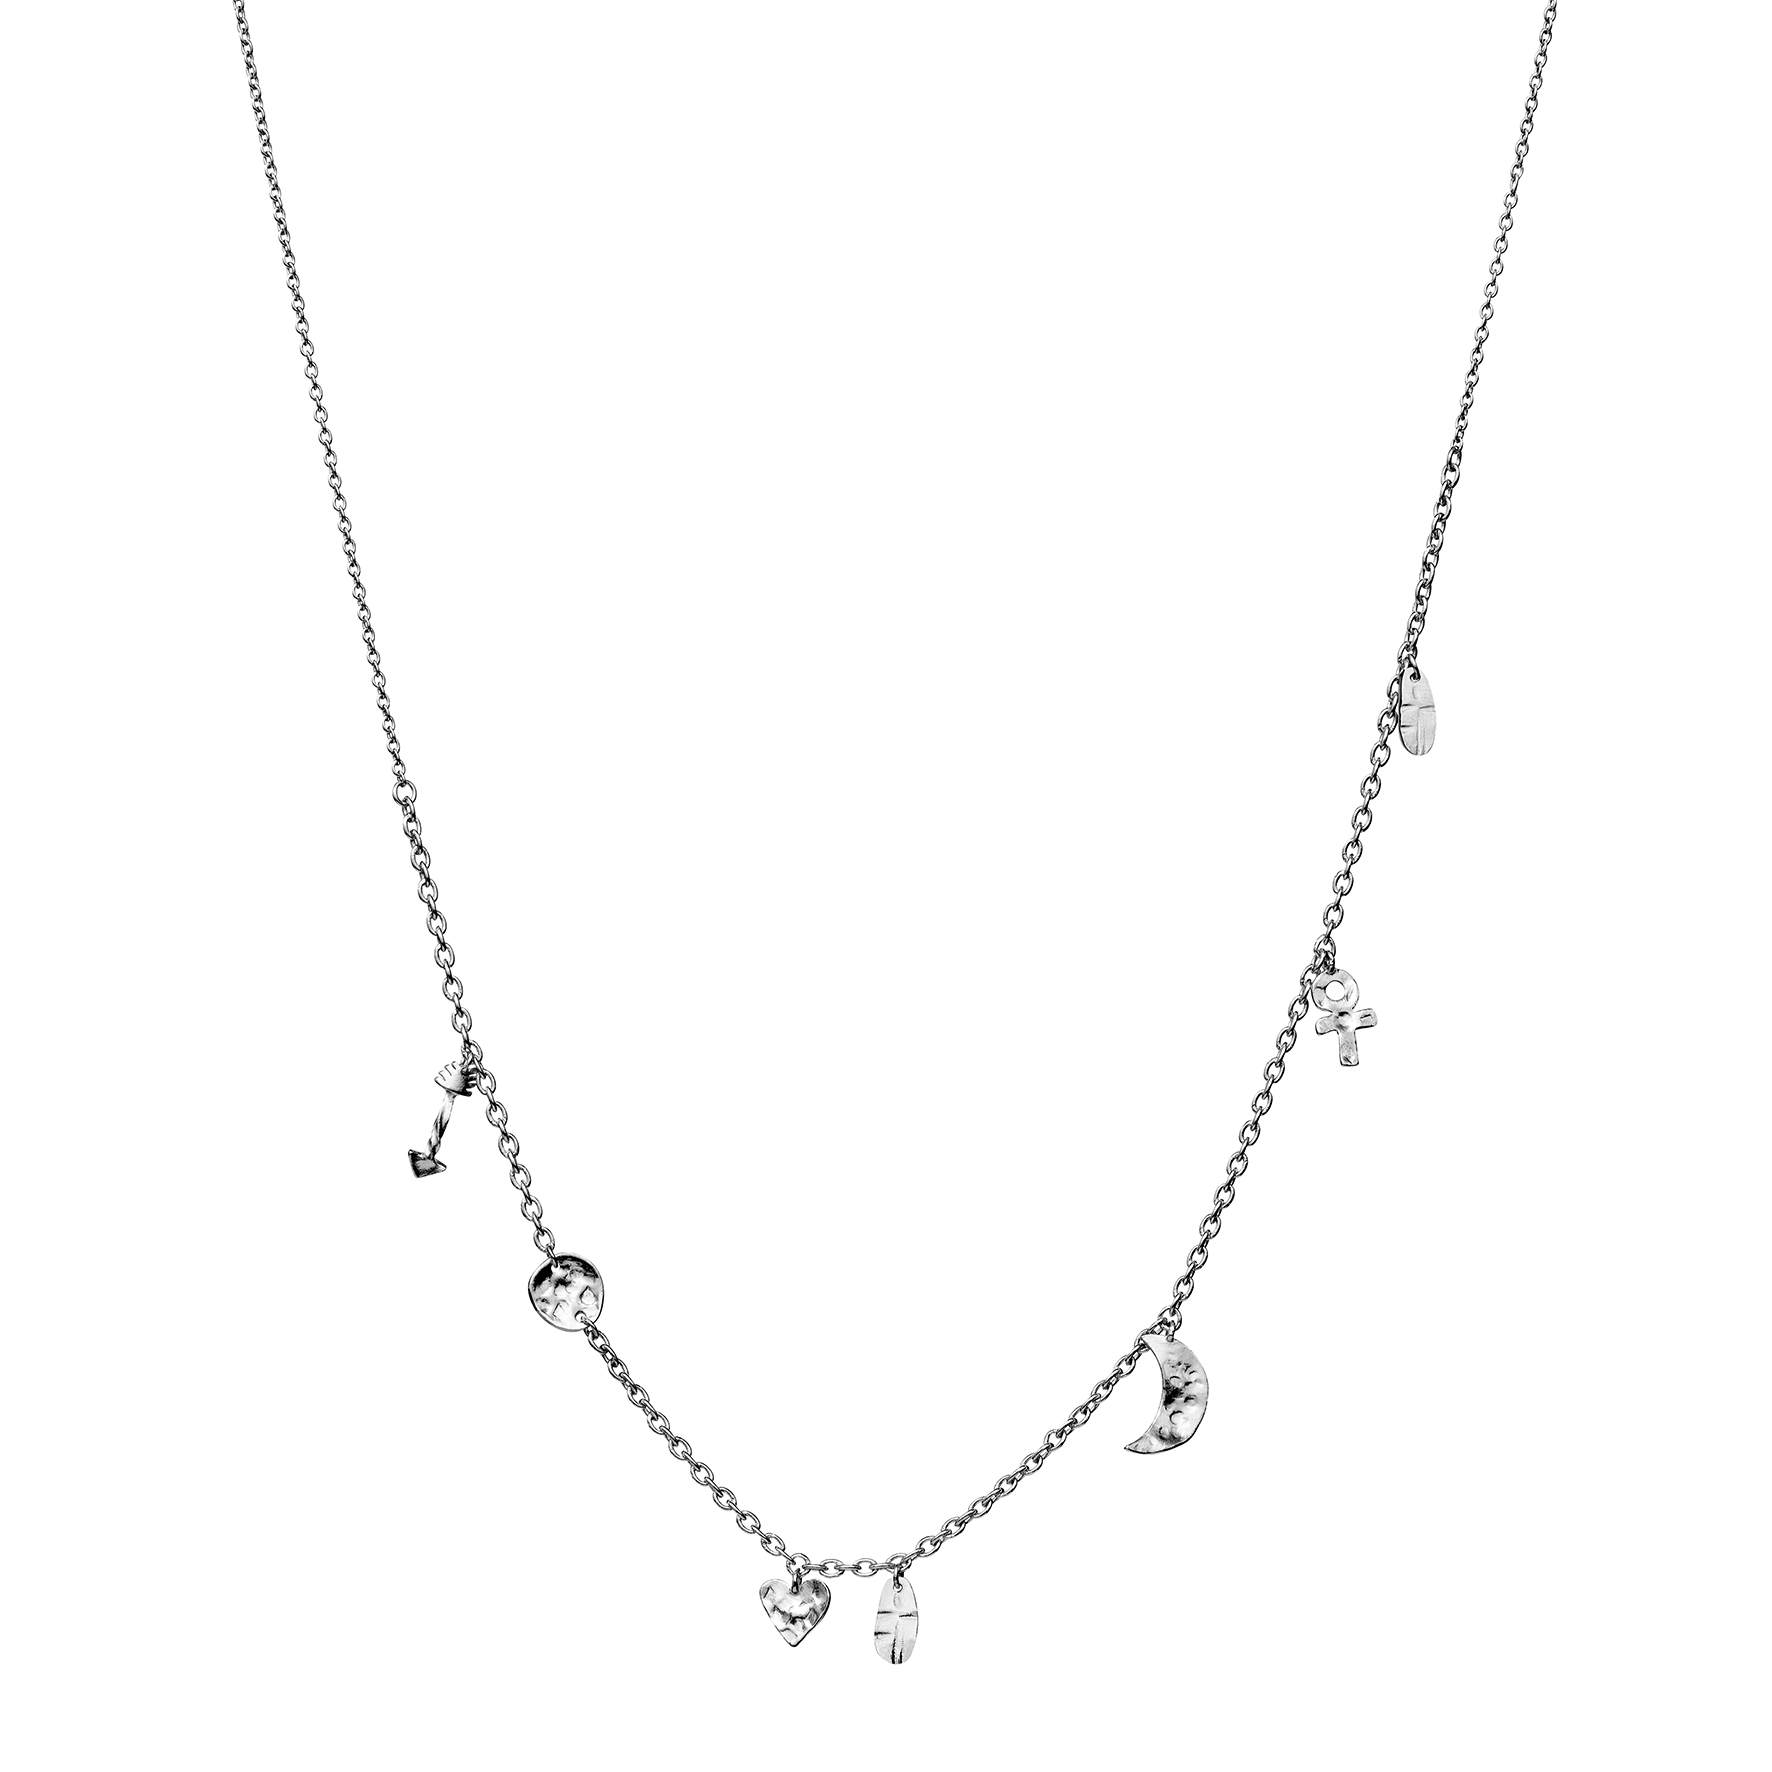 Cresida Necklace from Maanesten in Silver Sterling 925